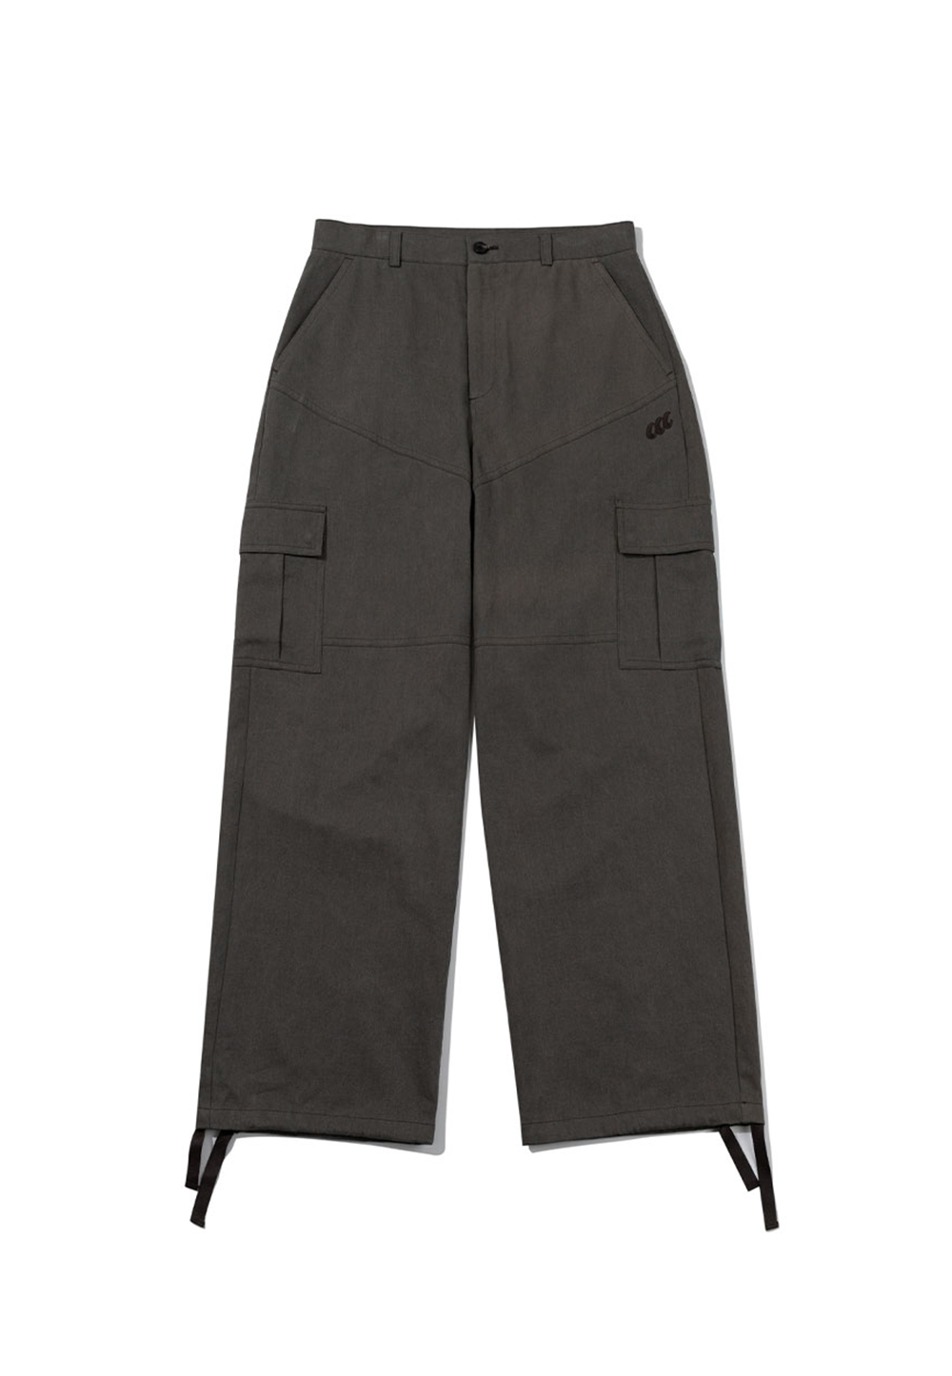 Claw daily wide string cargo pants - CHARCOAL